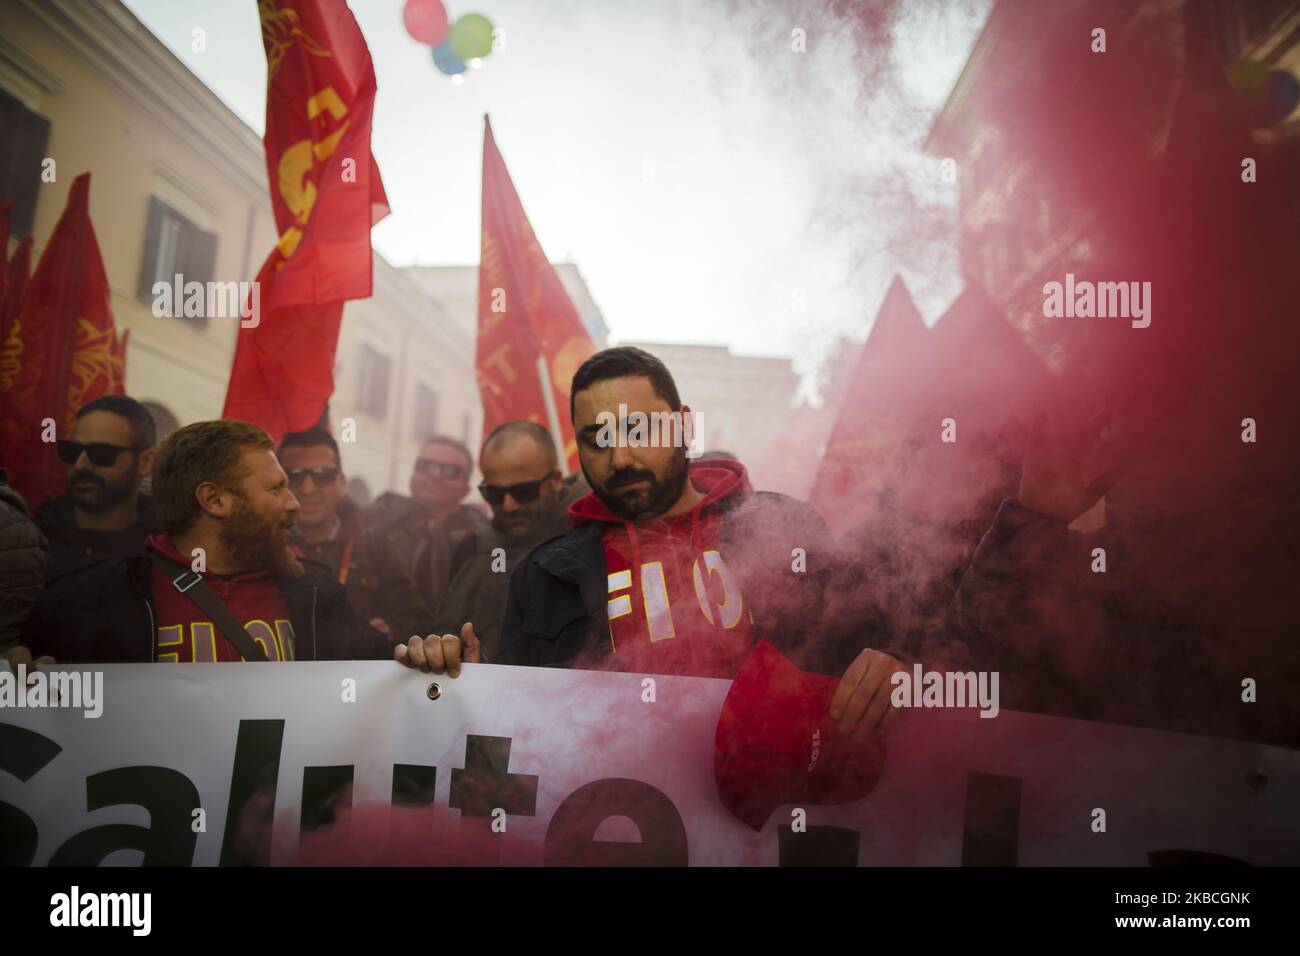 Hundreds of Ilva workers from Taranto protest in Piazza Santi Apostoli in Rome, Italy, on December 10, 2019.Workers from the FIOM metalworkers union joined other workers and unions from all sectors coming from all over Italy against the industrial crisis and the closure of factories as the Italian government is negotiating a new plan with the world's biggest steelmaker ArcelorMittal to save the Taranto steel plant. (Photo by Christian Minelli/NurPhoto) Stock Photo